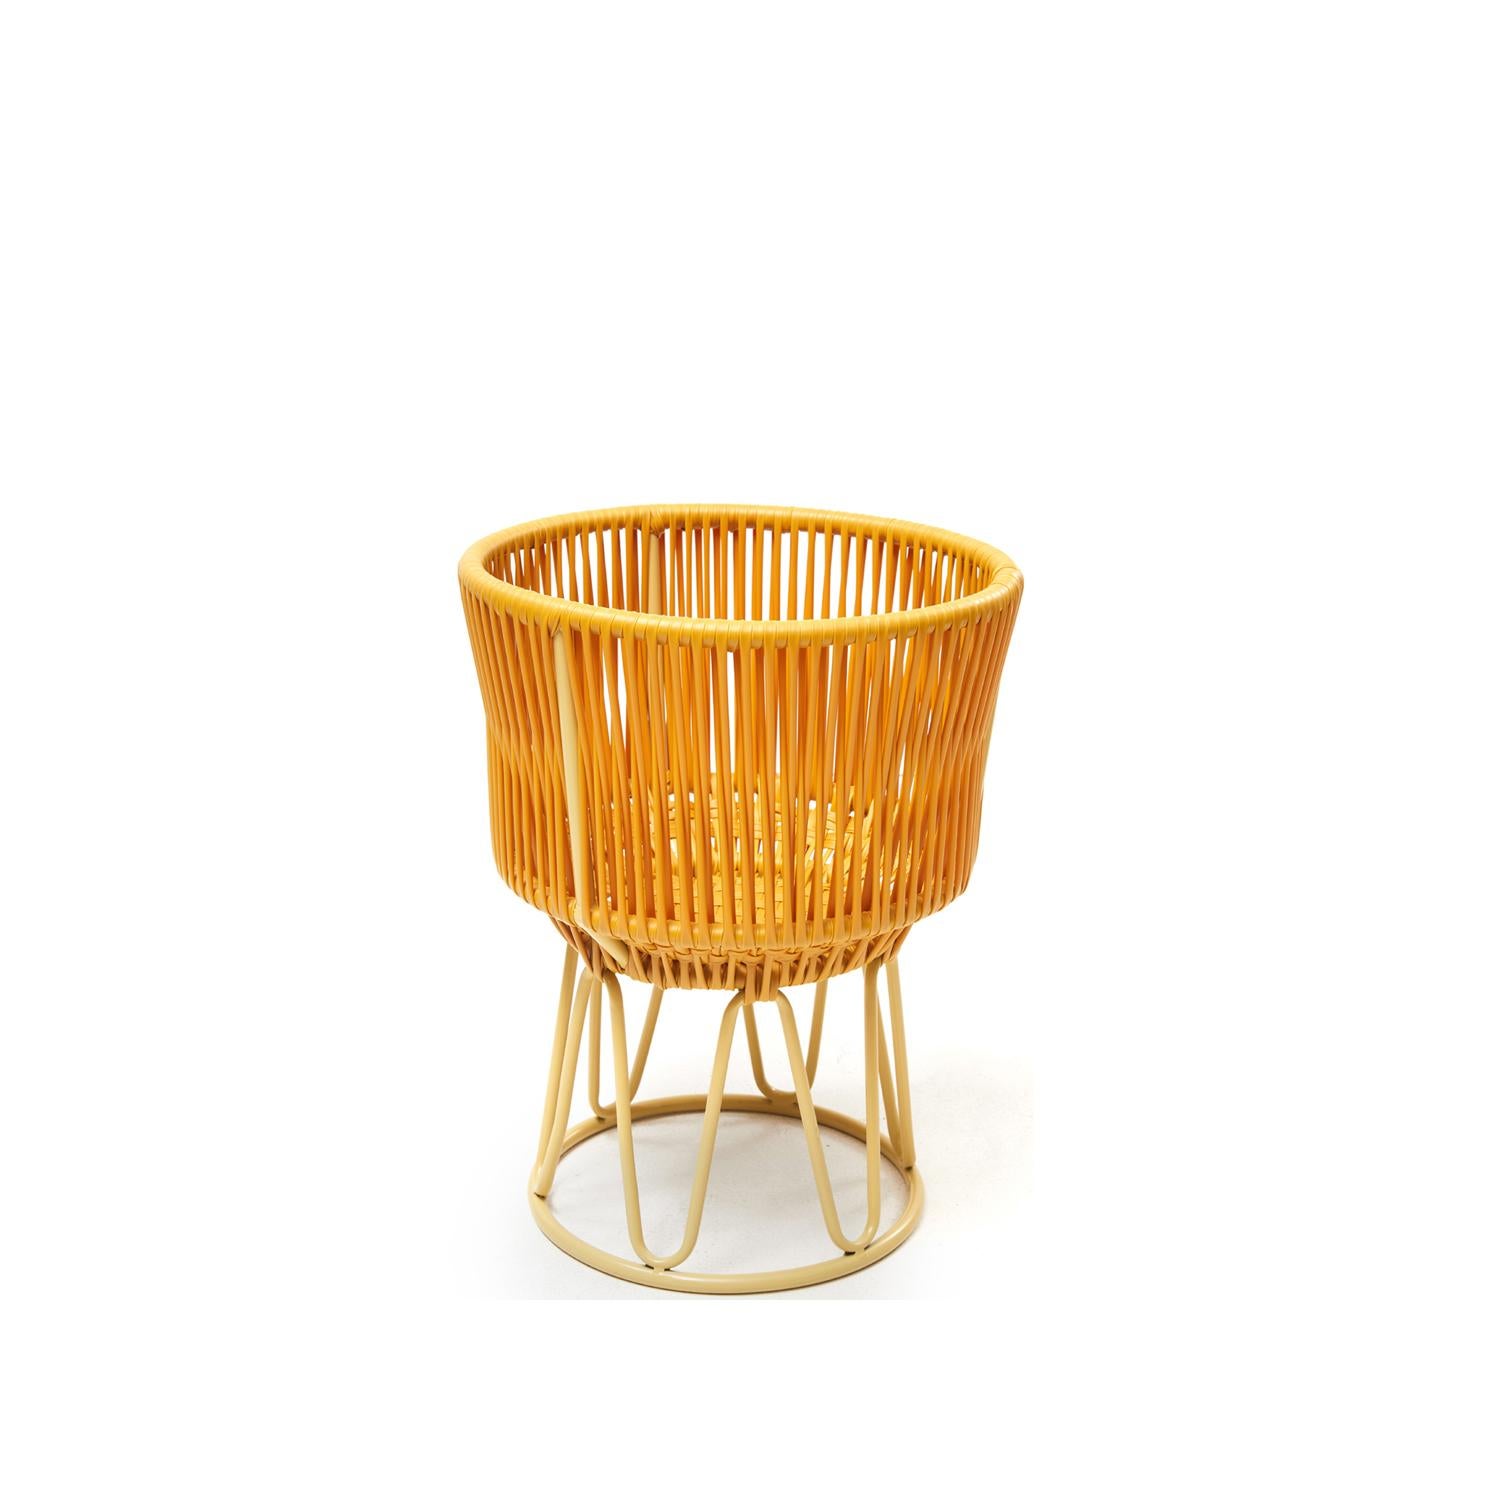 Honey circo flower pot 1 by Sebastian Herkner
Materials: Galvanized and powder-coated tubular steel. PVC strings.
Technique: Made from recycled plastic. Weaved by local craftspeople in Colombia. 
Dimensions: 
Top diameter 36 x Height 48 cm